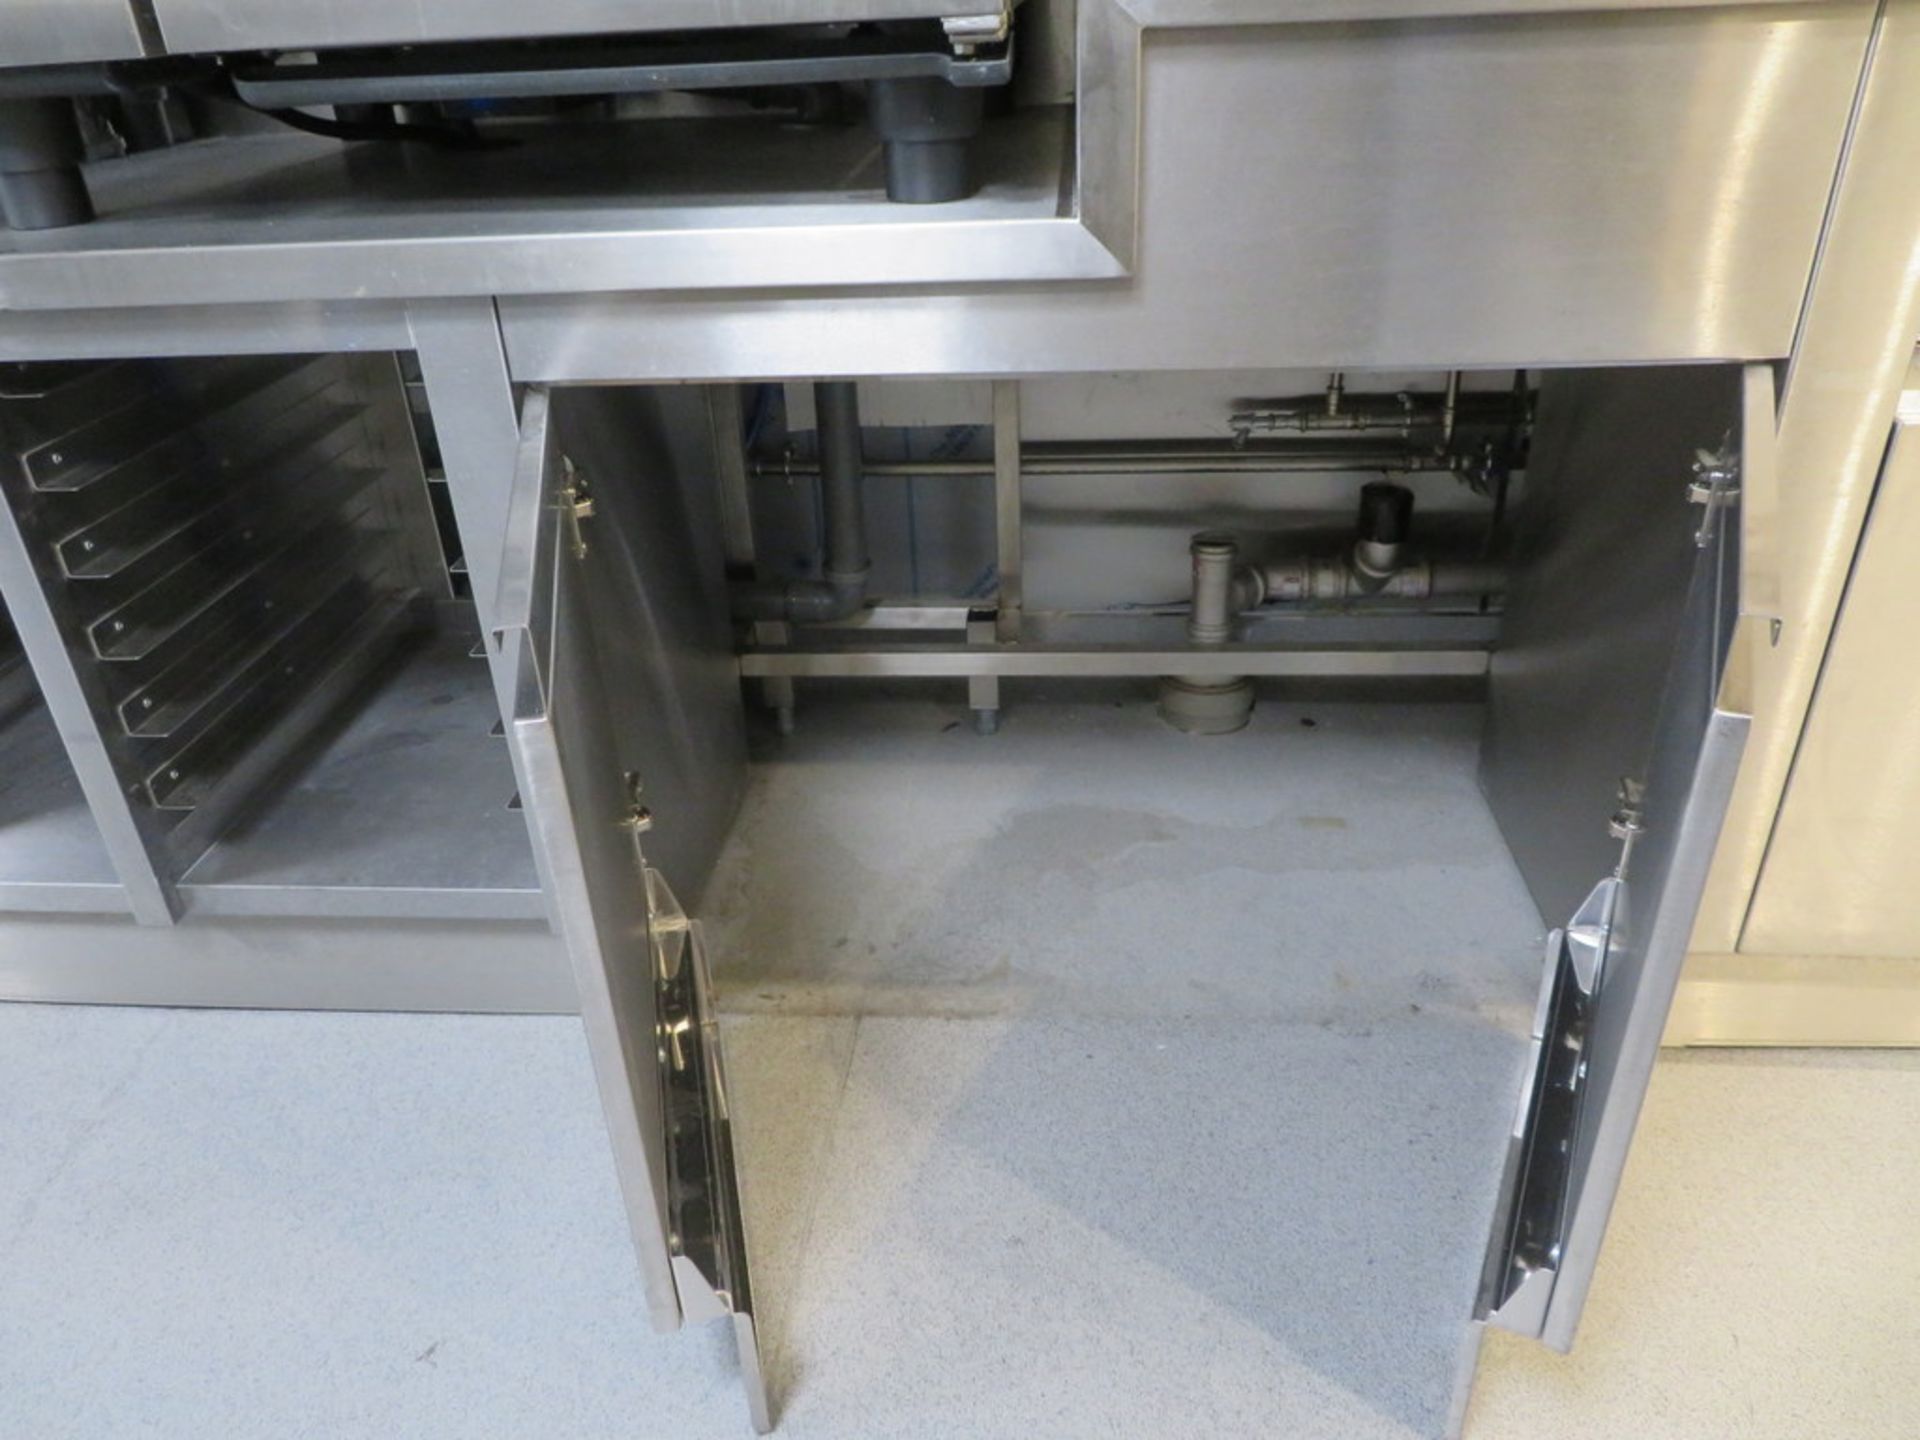 STAINLESS STEEL SIDE UNIT WITH SUNKEN TOP SECTION - Image 5 of 7